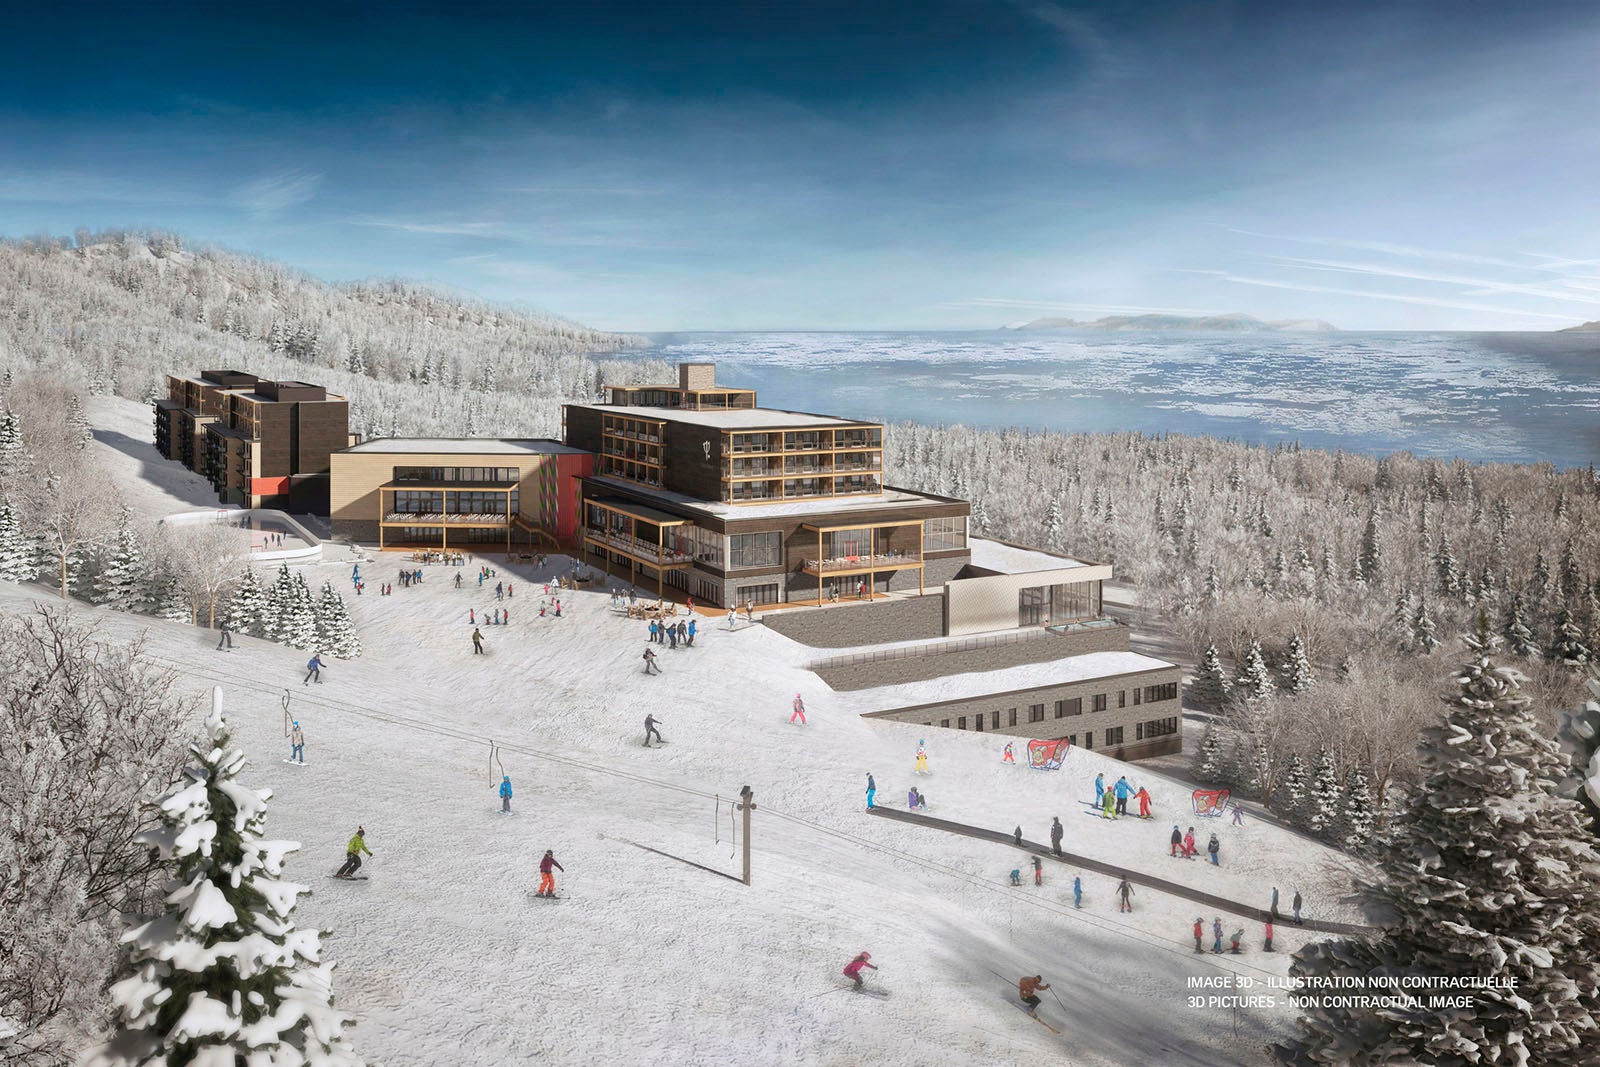 Club Med will open its first ski resort in North America this winter — and it’s ..